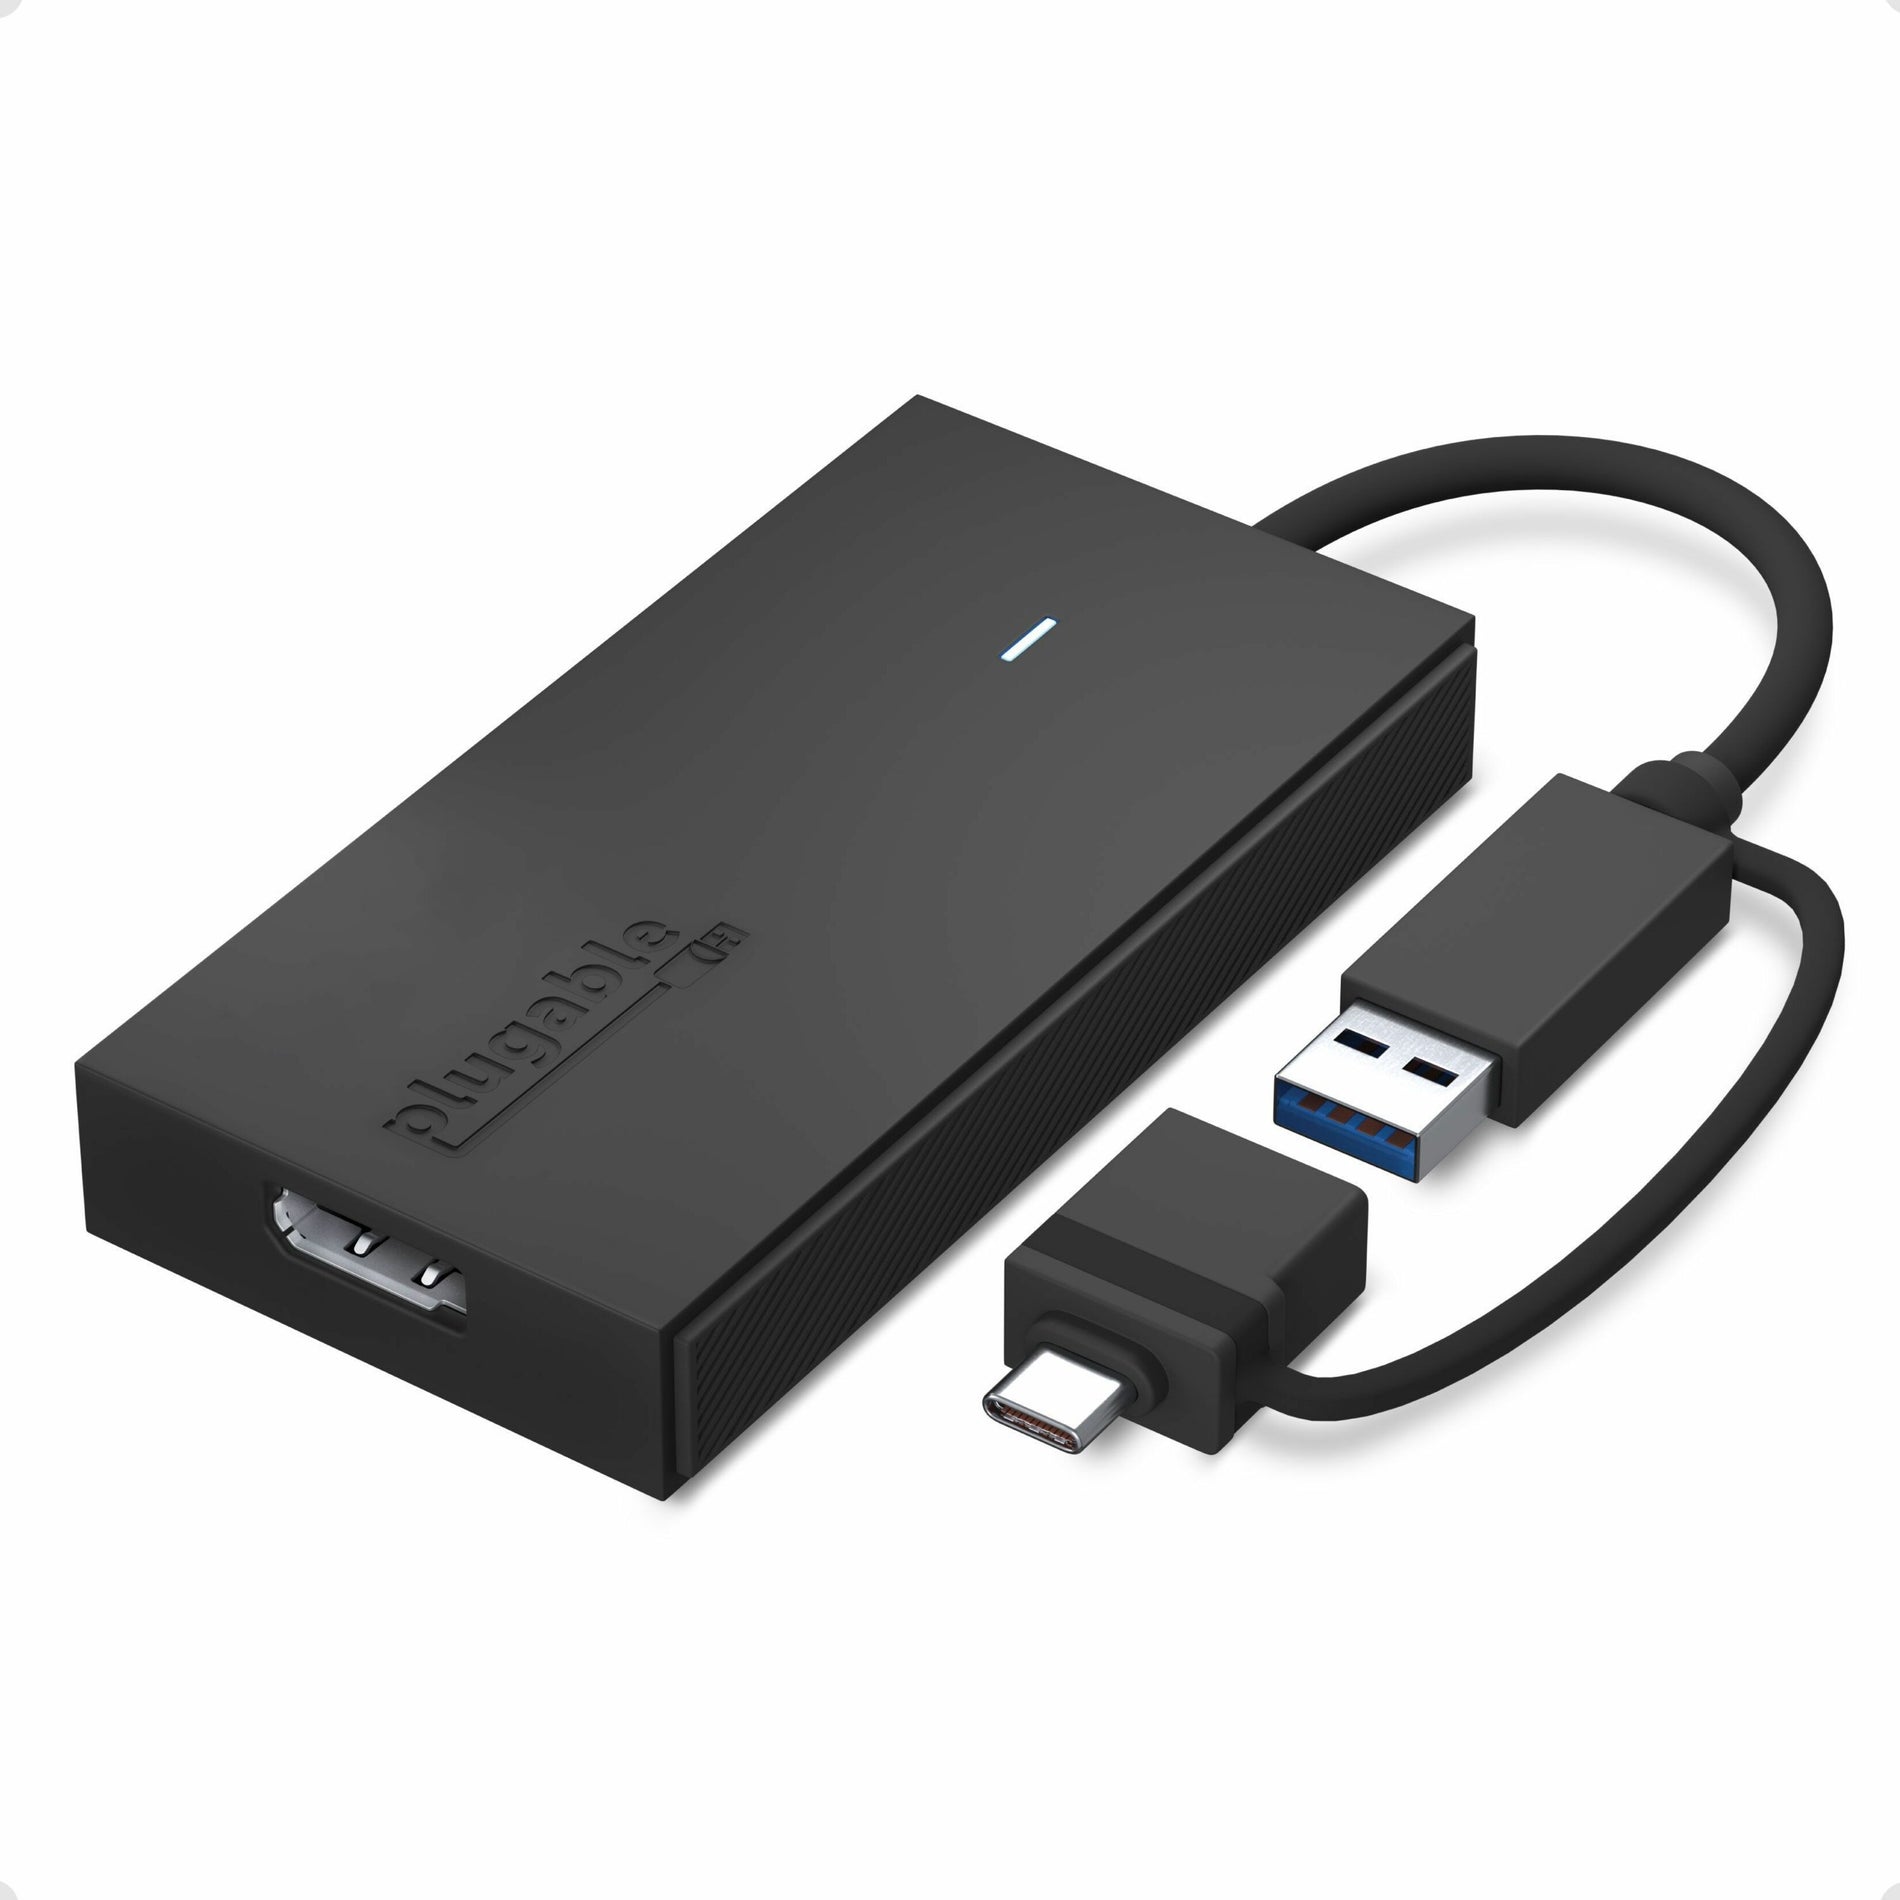 Plugable UGA-DP-S DisplayPort/USB-C/USB Audio/Video Adapter, HDCP Charging, 1920 x 1080 Resolution Supported